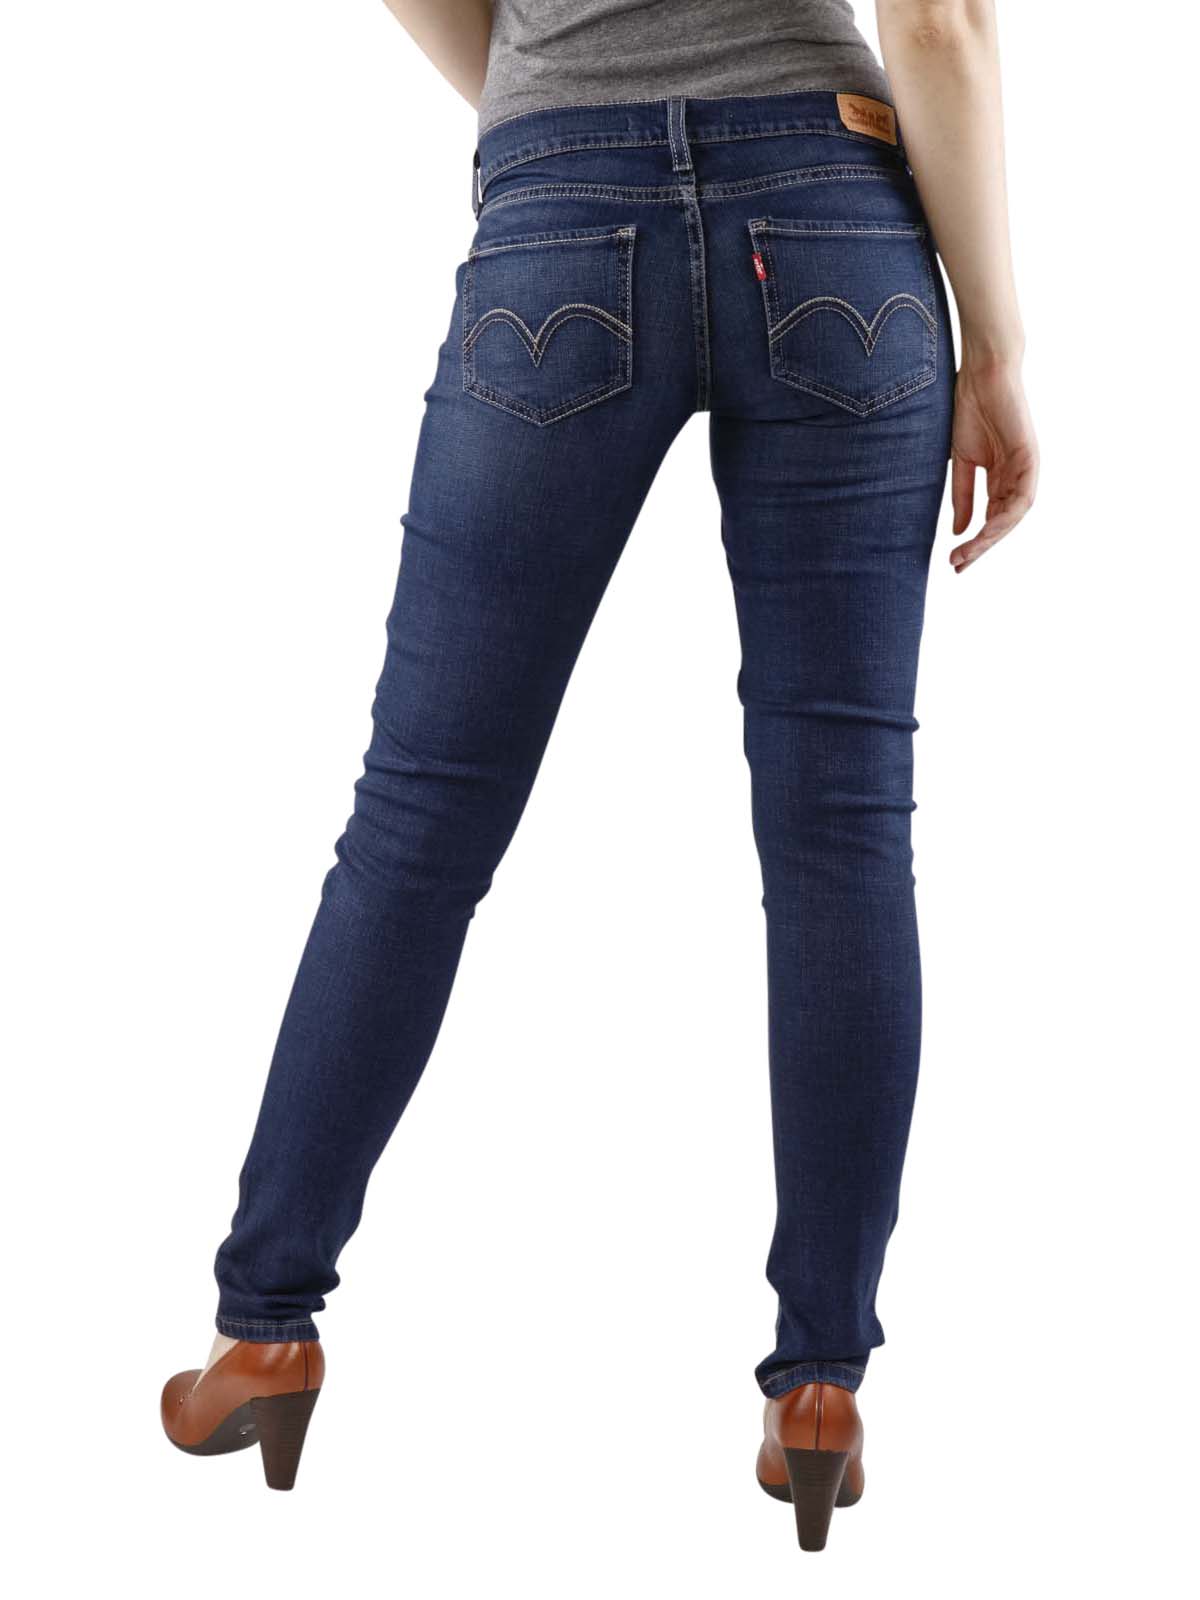 Women's Levi's 524 Skinny Jeans Clearance, SAVE 41% 